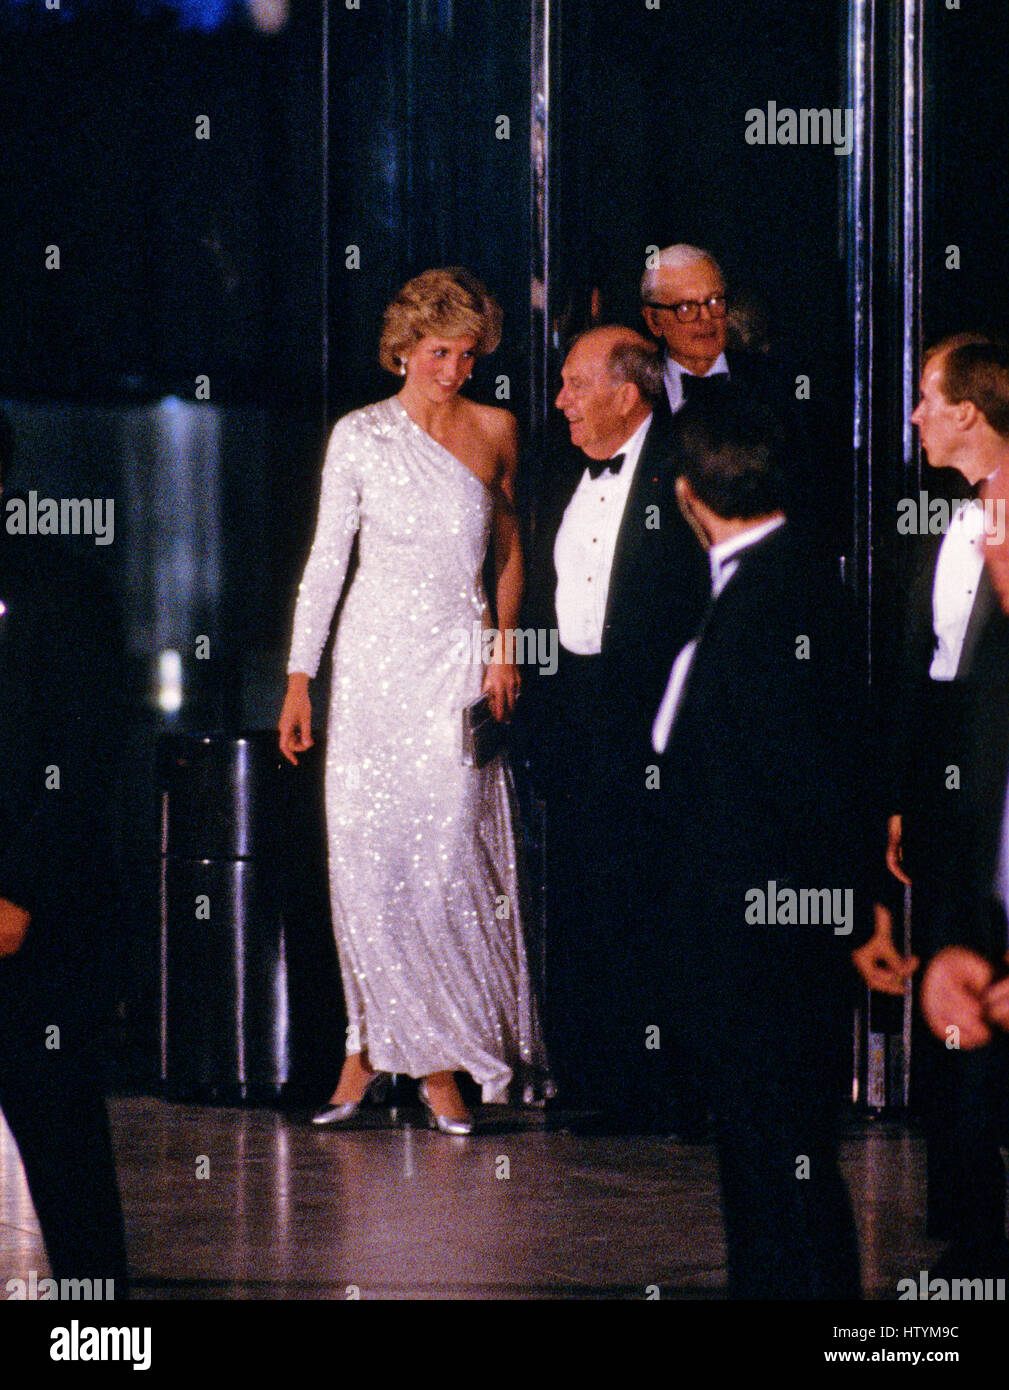 Princess Diana departs the National Gallery of Art in Washington, DC following an evening dinner and reception accompanied by Dr Franklin Murphy, Board Chairman of the National Gallery of Art, and John Stevenson, President of the National Gallery of Art, Stock Photo